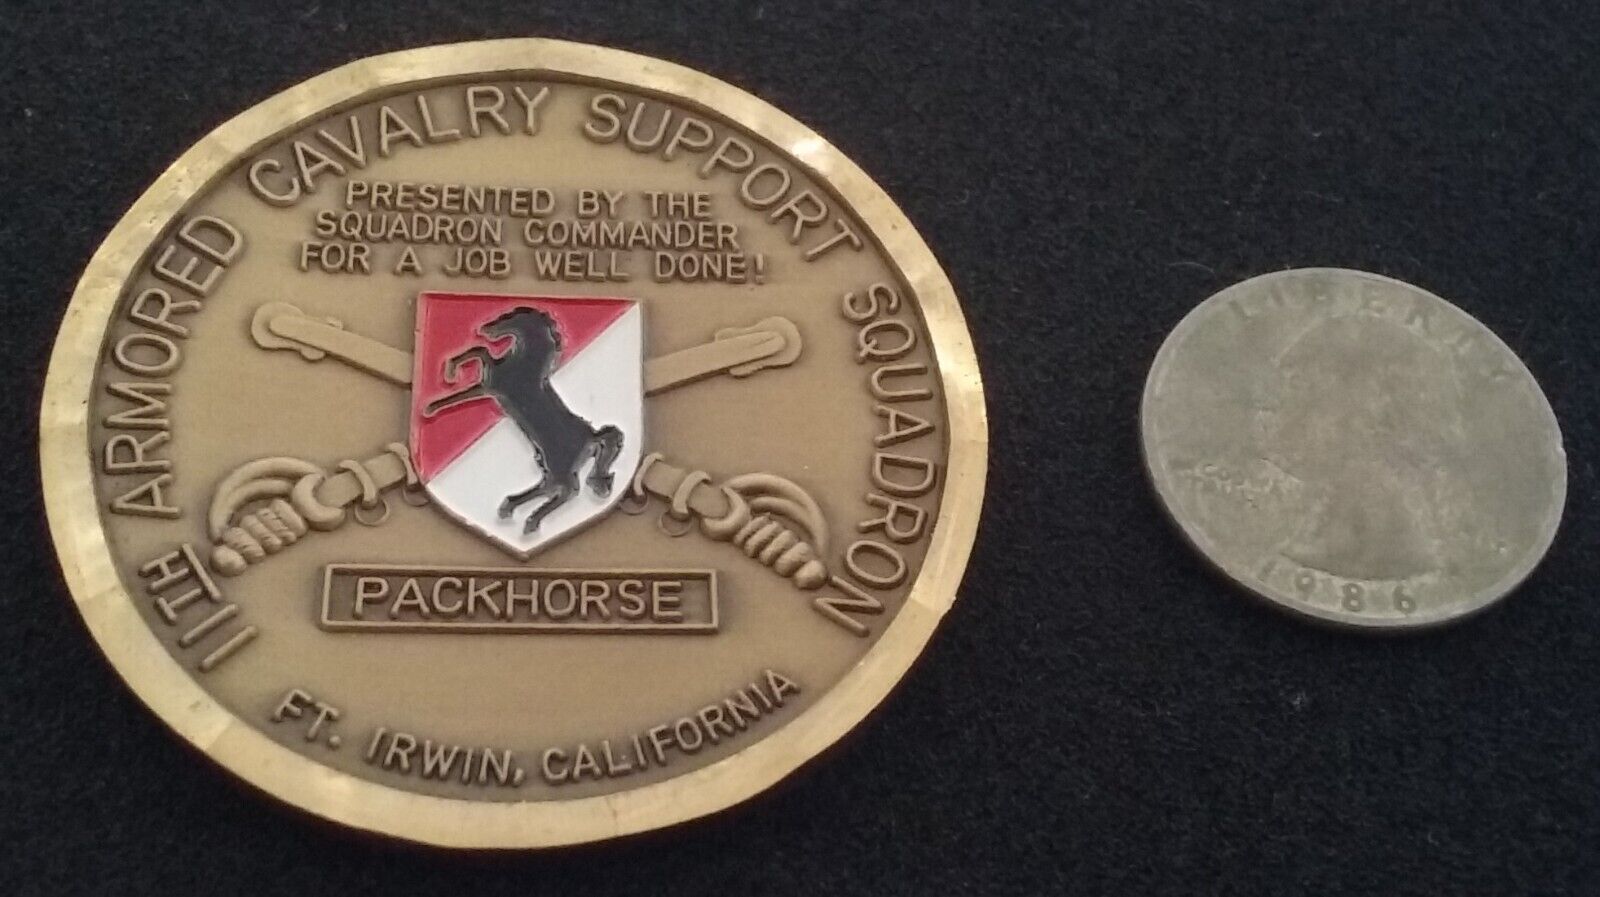 RARE 11th Armored Cavalry Regiment Packhorse ACR OPFOR Blackhorse Challenge Coin